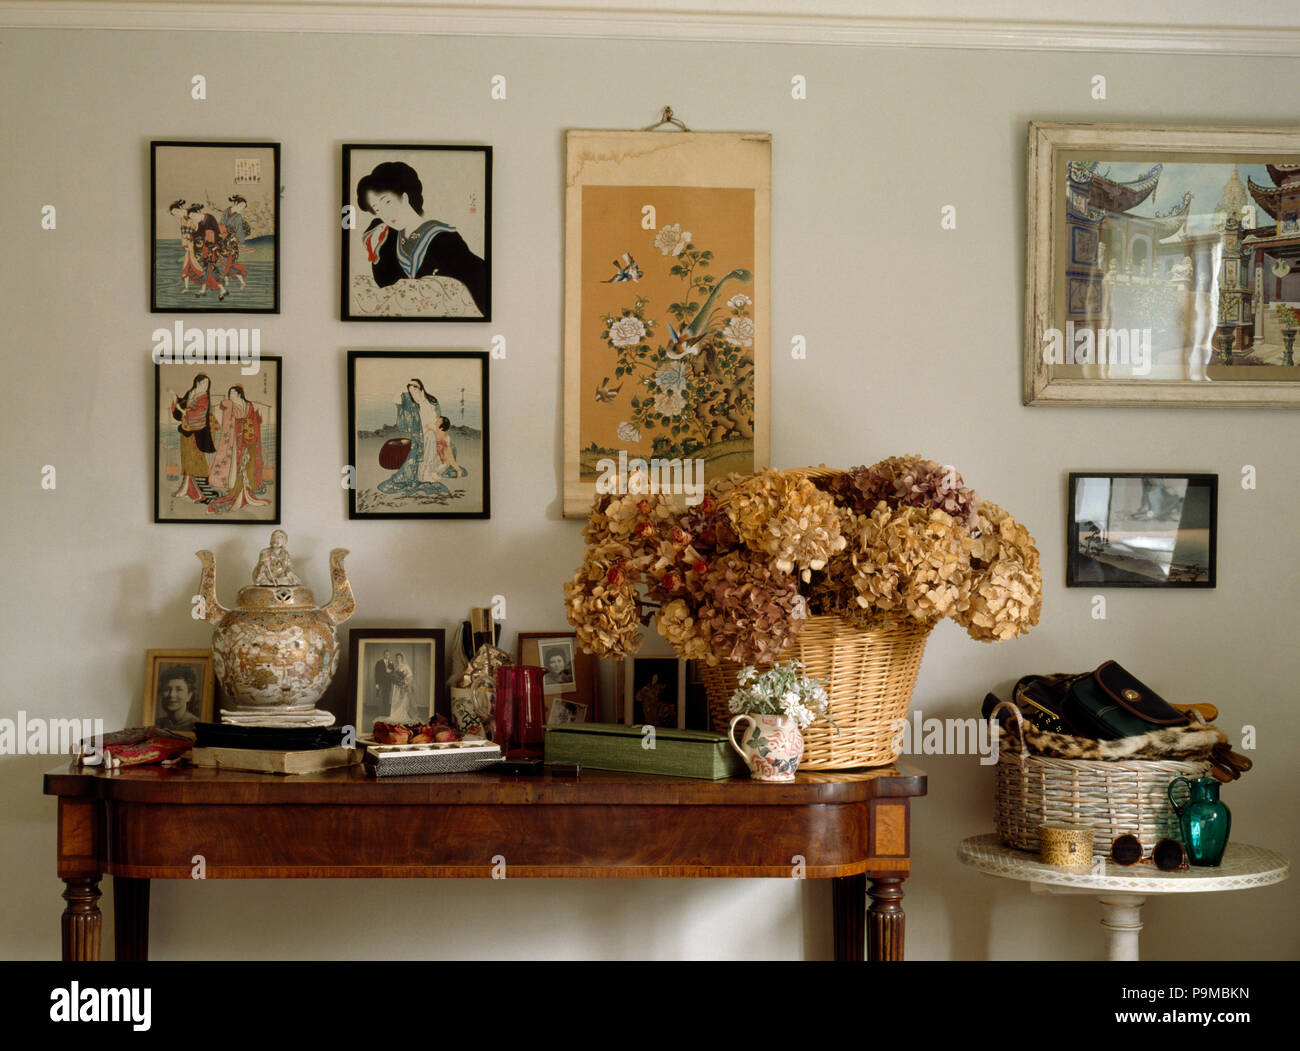 Oriental pictures on wall above antique table with basket of dried hydrangeas Stock Photo